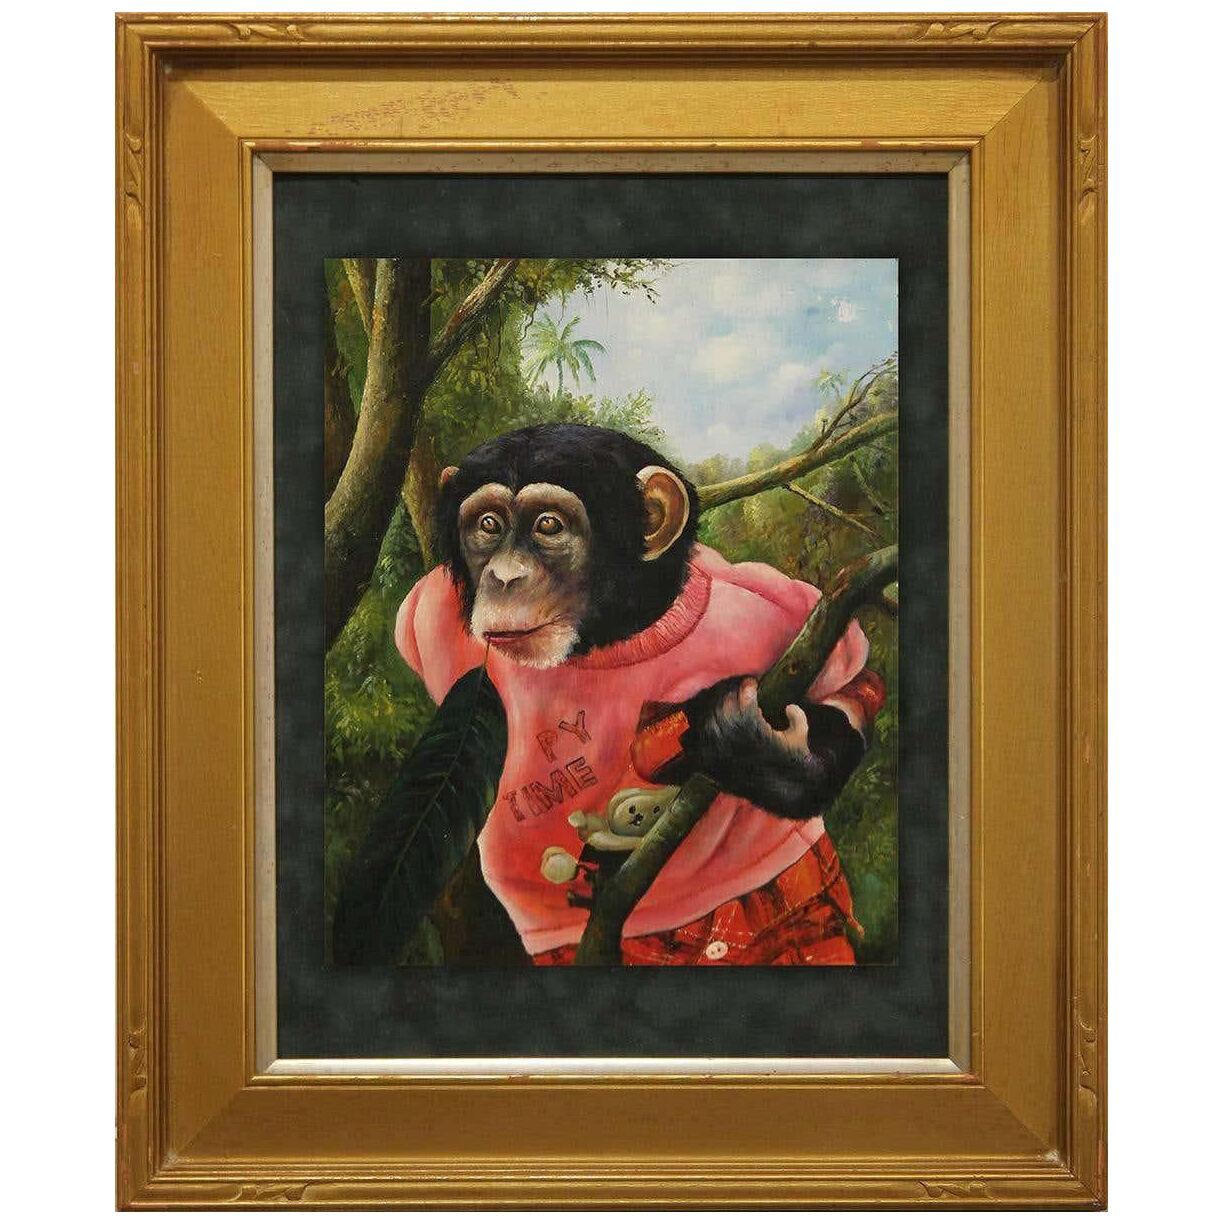 Late 20th Century Singerie Style Portrait of a Chimpanzee Wearing a Red Shirt